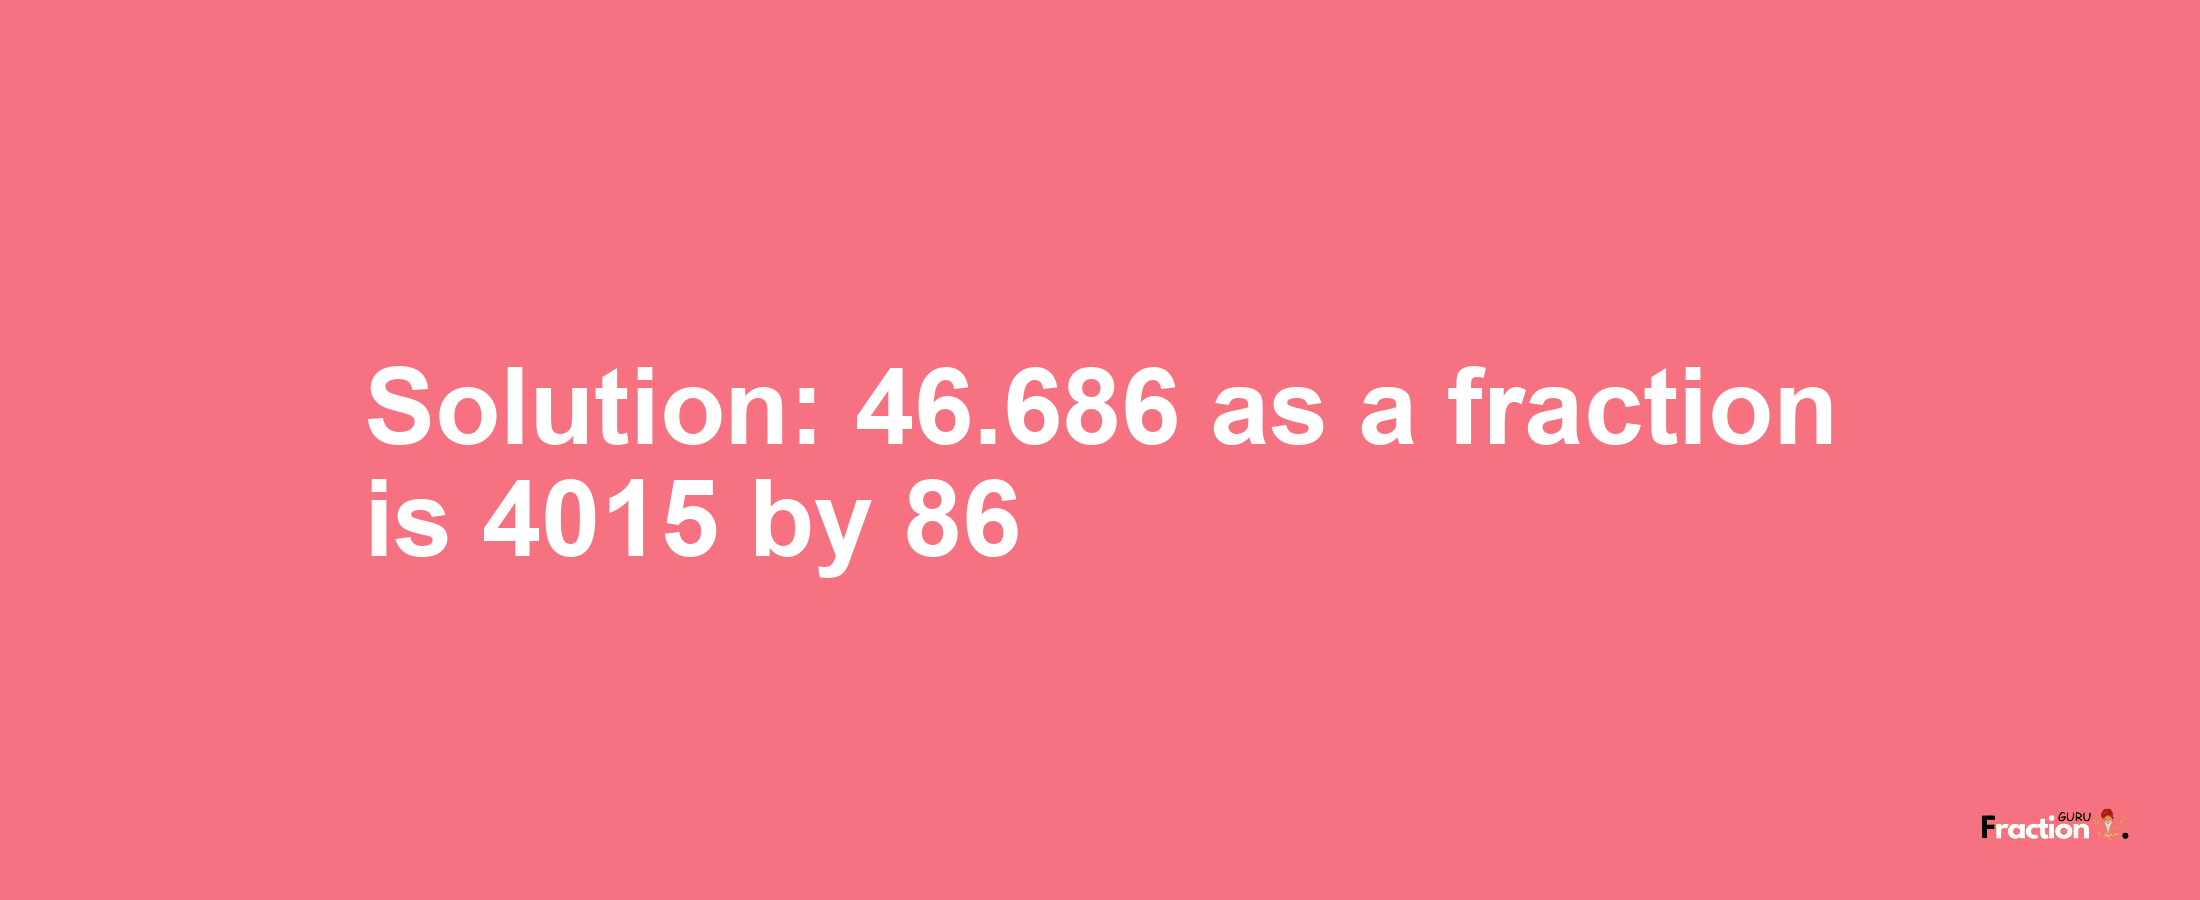 Solution:46.686 as a fraction is 4015/86